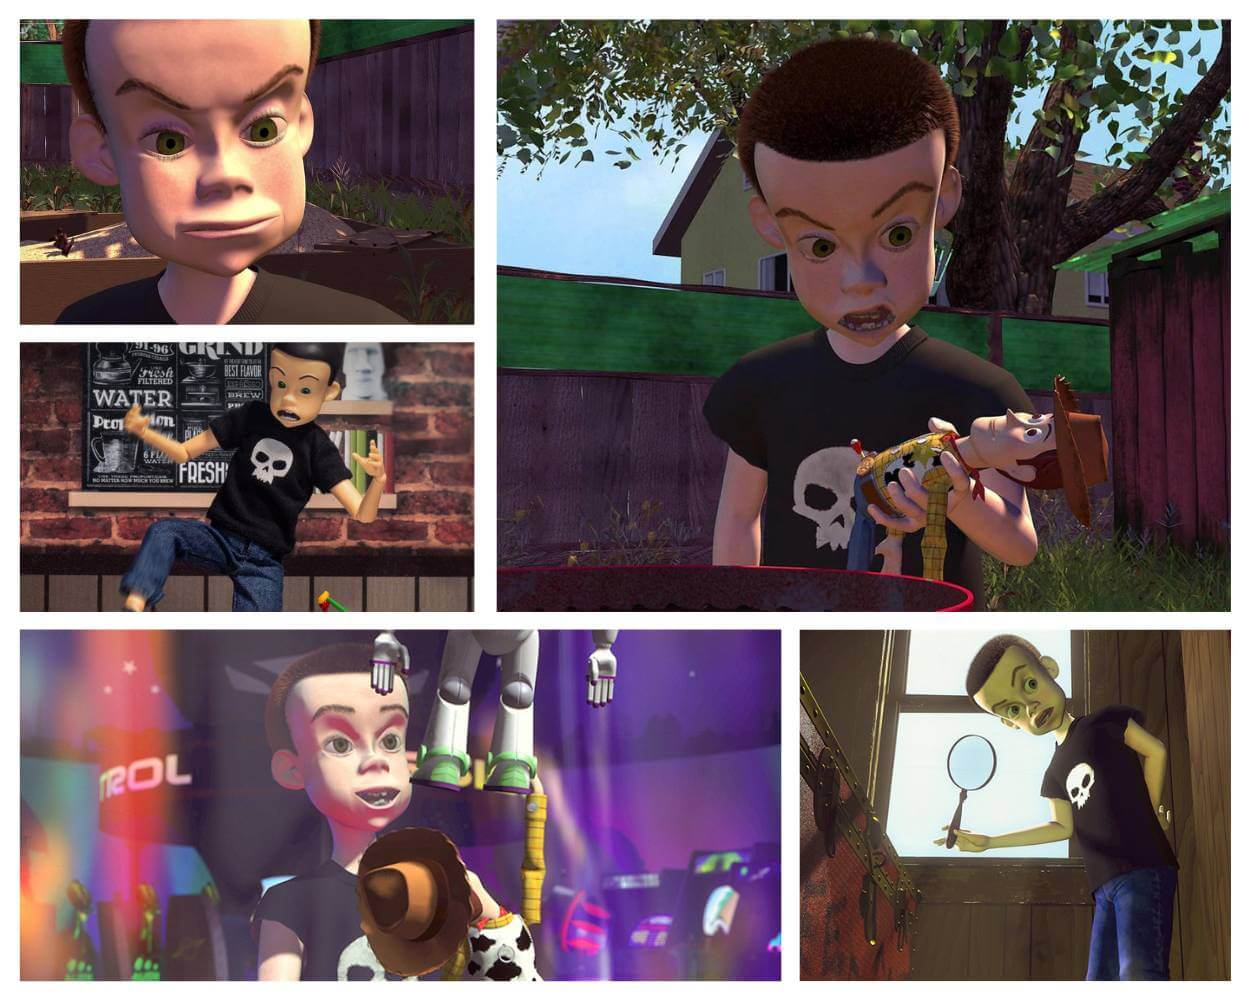 Sid Phillips The Toy Story Bully